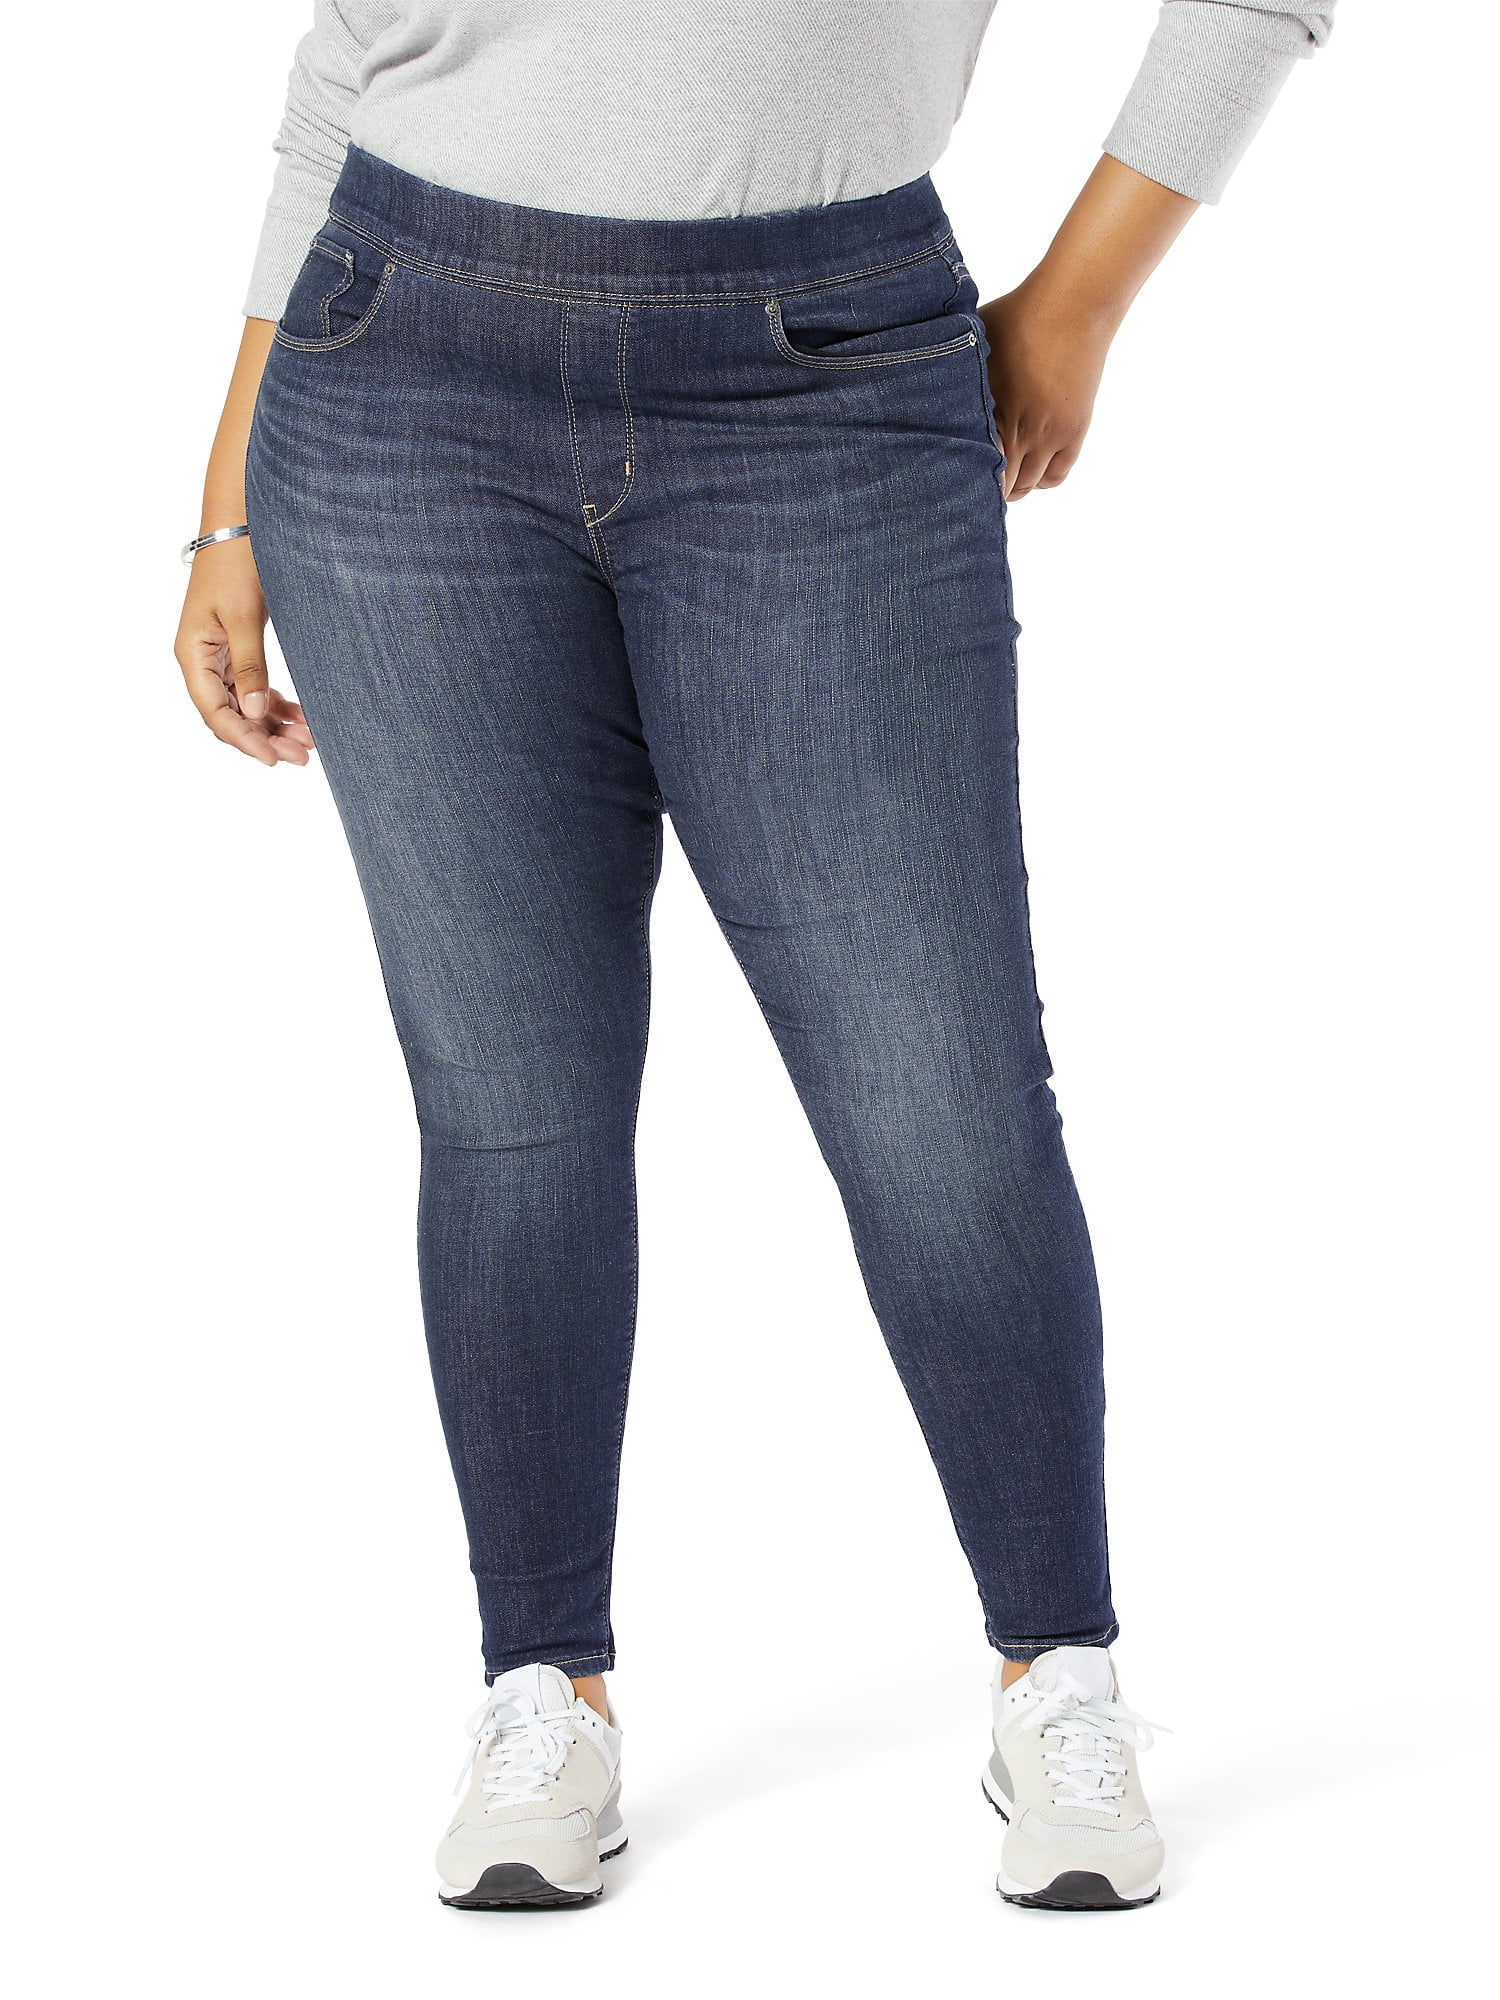 Signature by Levi Strauss & Co. Women's Plus Shaping Pull-On Skinny Jeans -  